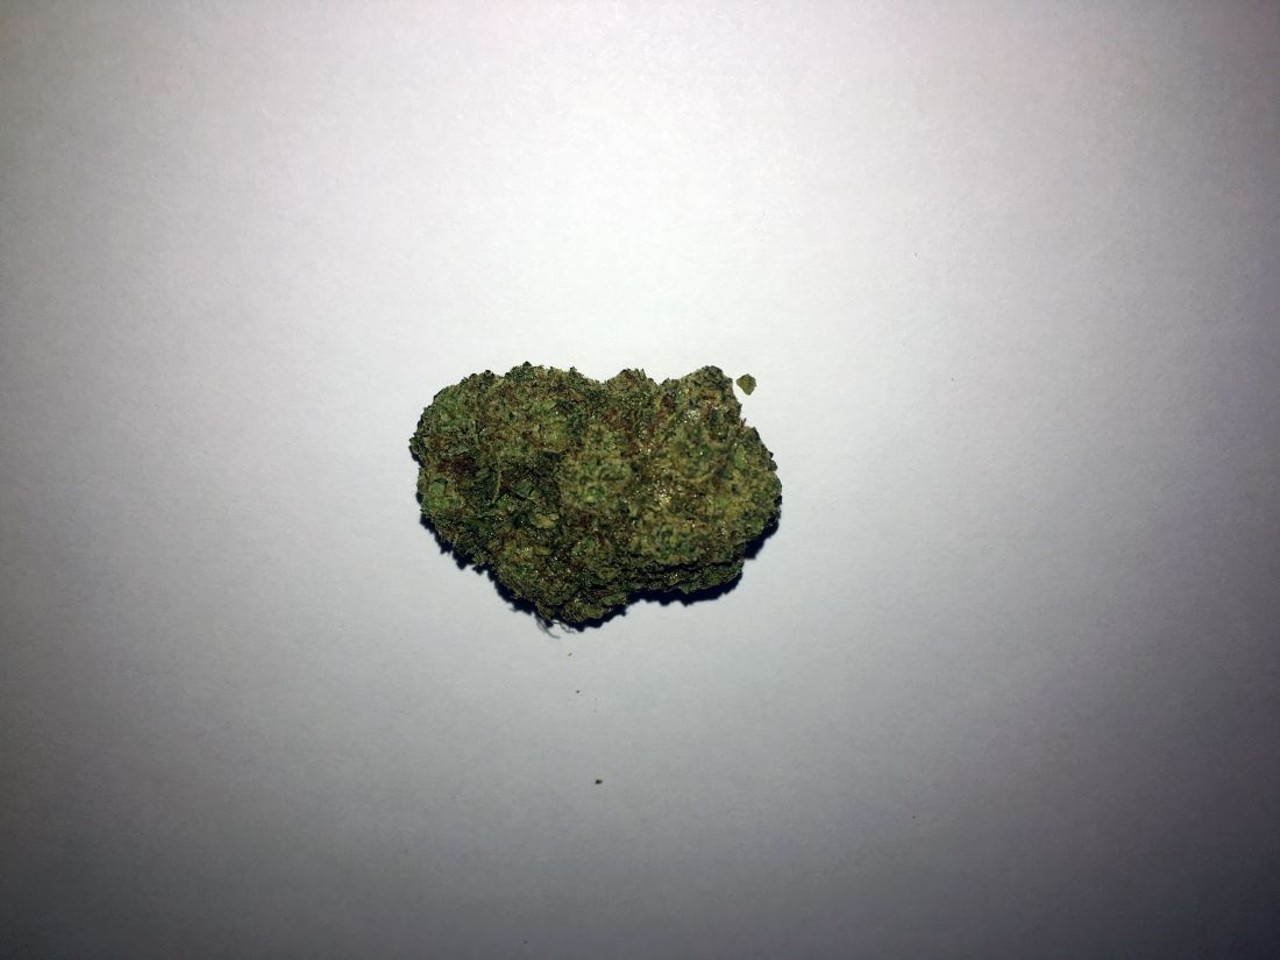 CodeGreen Detroit
Code's Gorilla Glue
A blend of 25 percent hybrid, 70 percent sativa, and 30 percent indica, CodeGreen's take on the Gorilla Glue strain is very potent indeed.
15500 E. Eight Mile Rd., Detroit; CodeGreen Detroit on Facebook; ;313-649-2755.